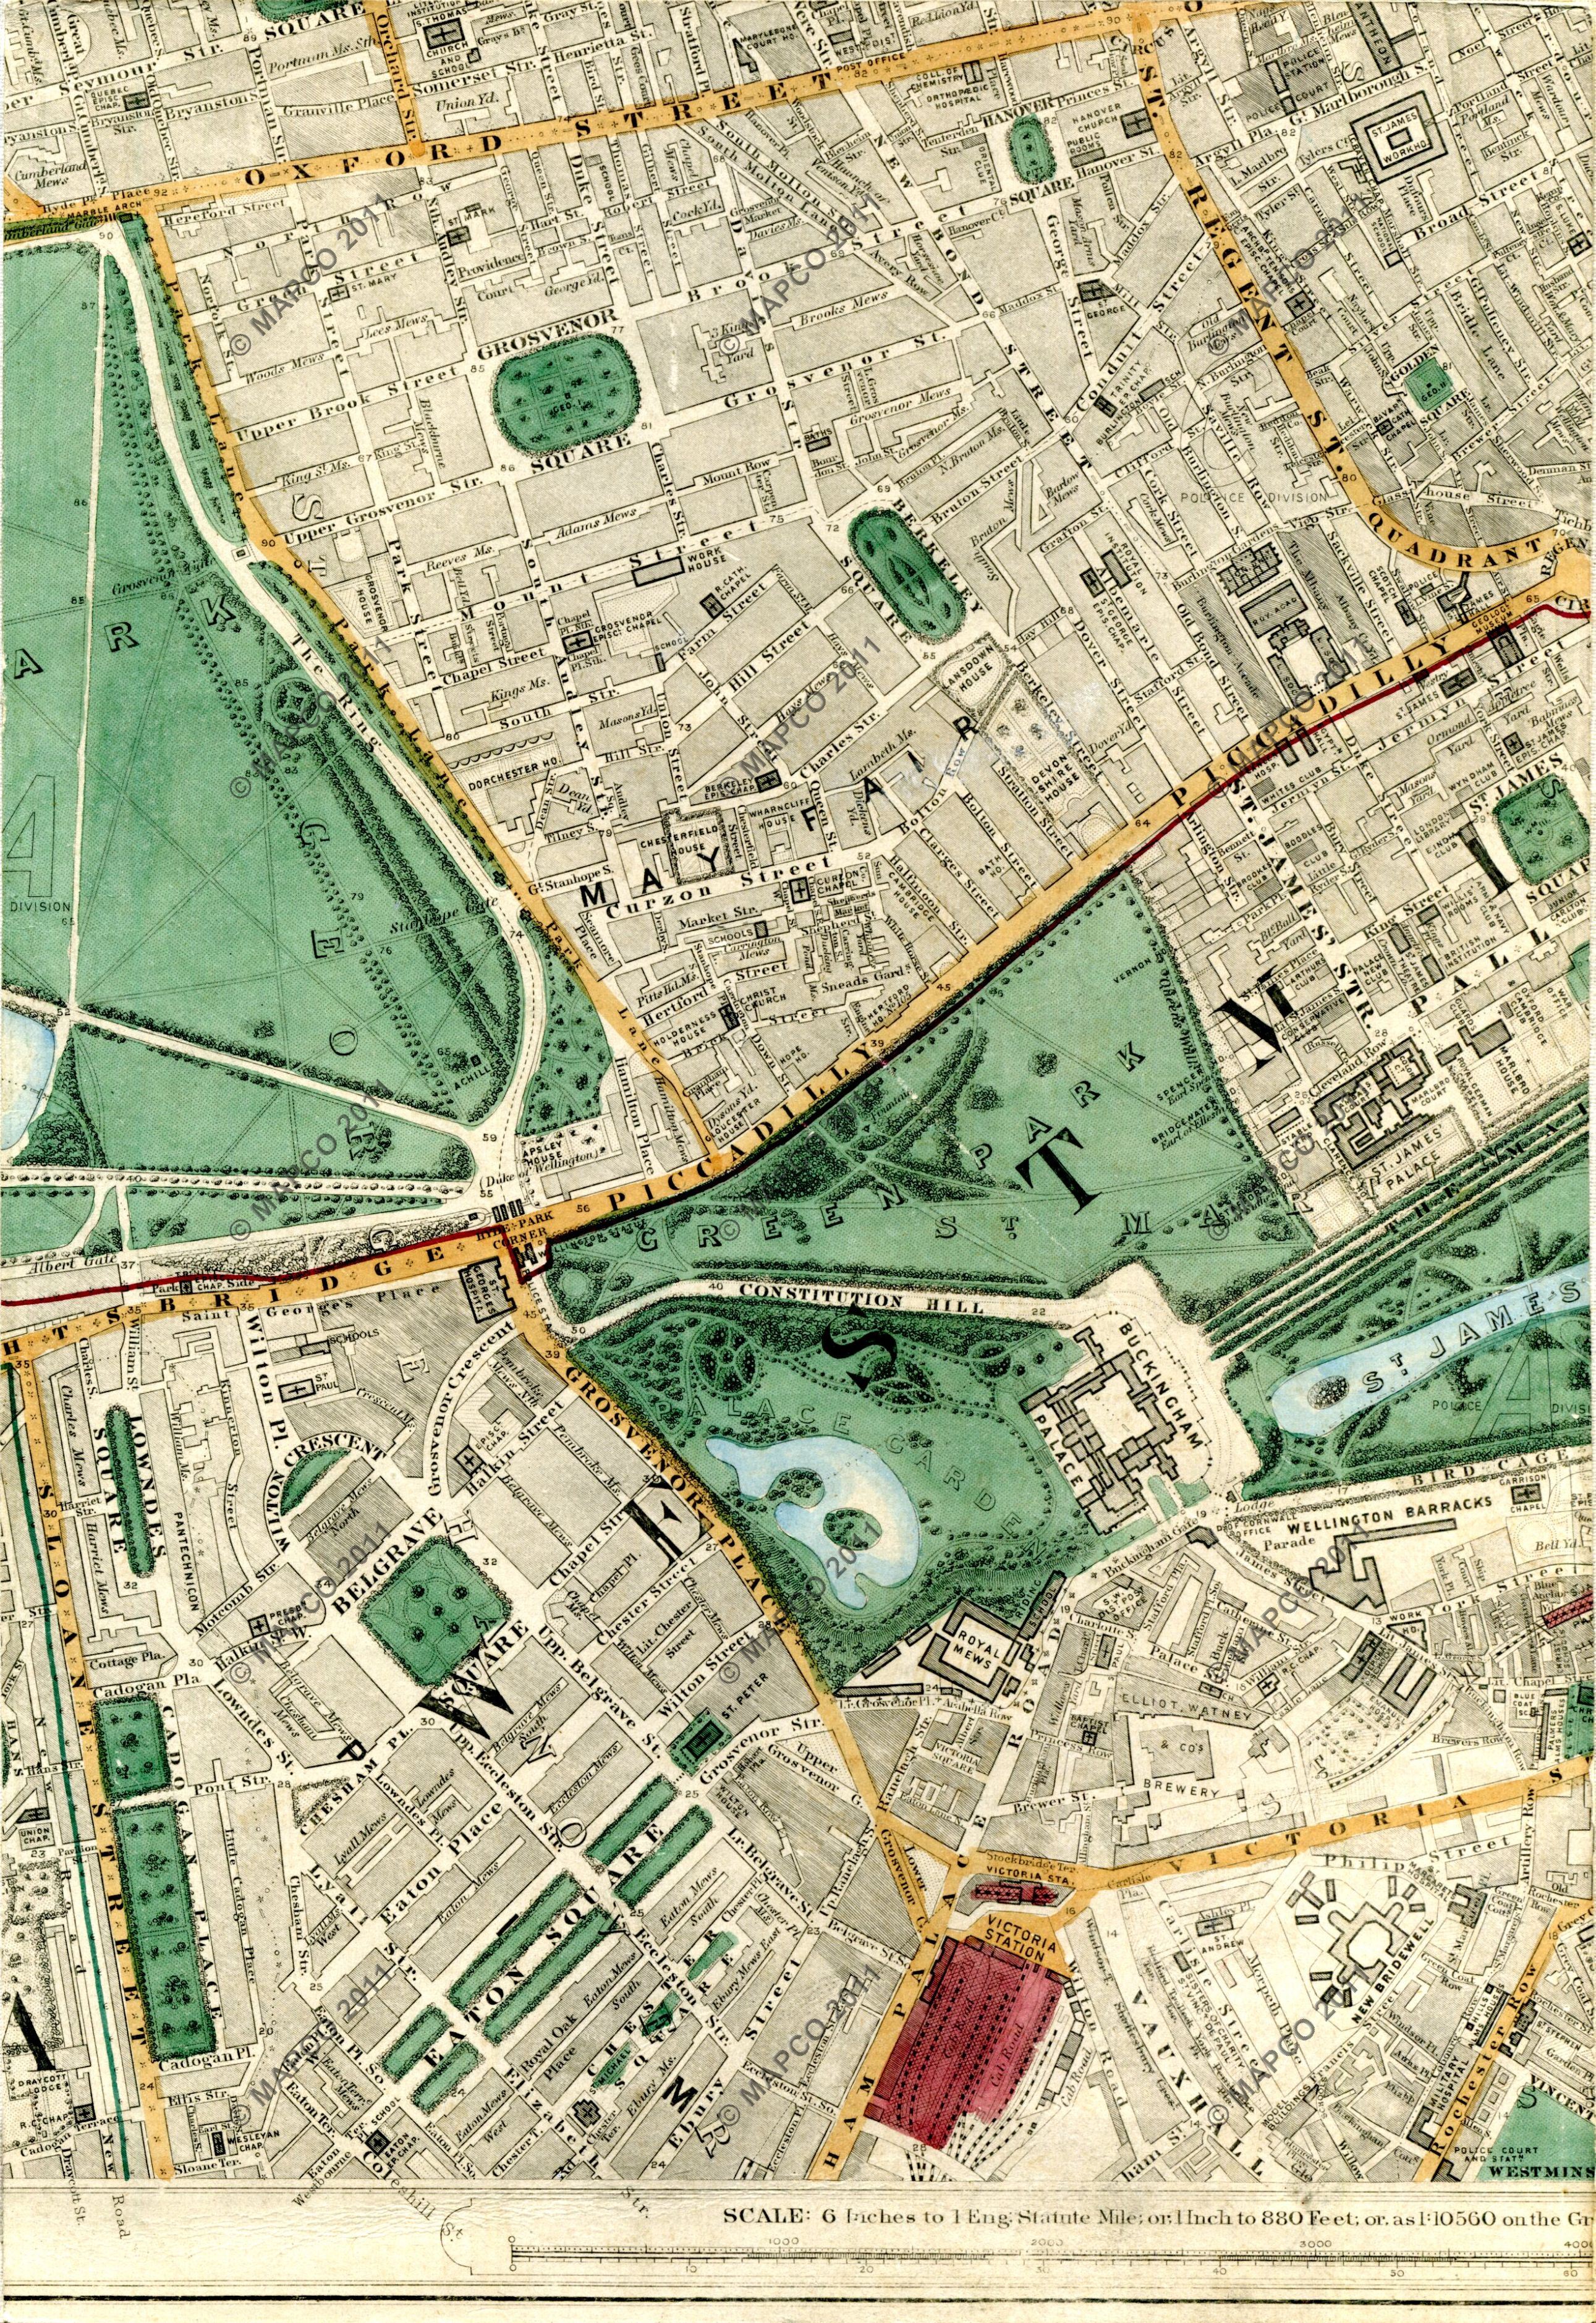 Stanford’s Library Map Of London And Its Suburbs 1872.